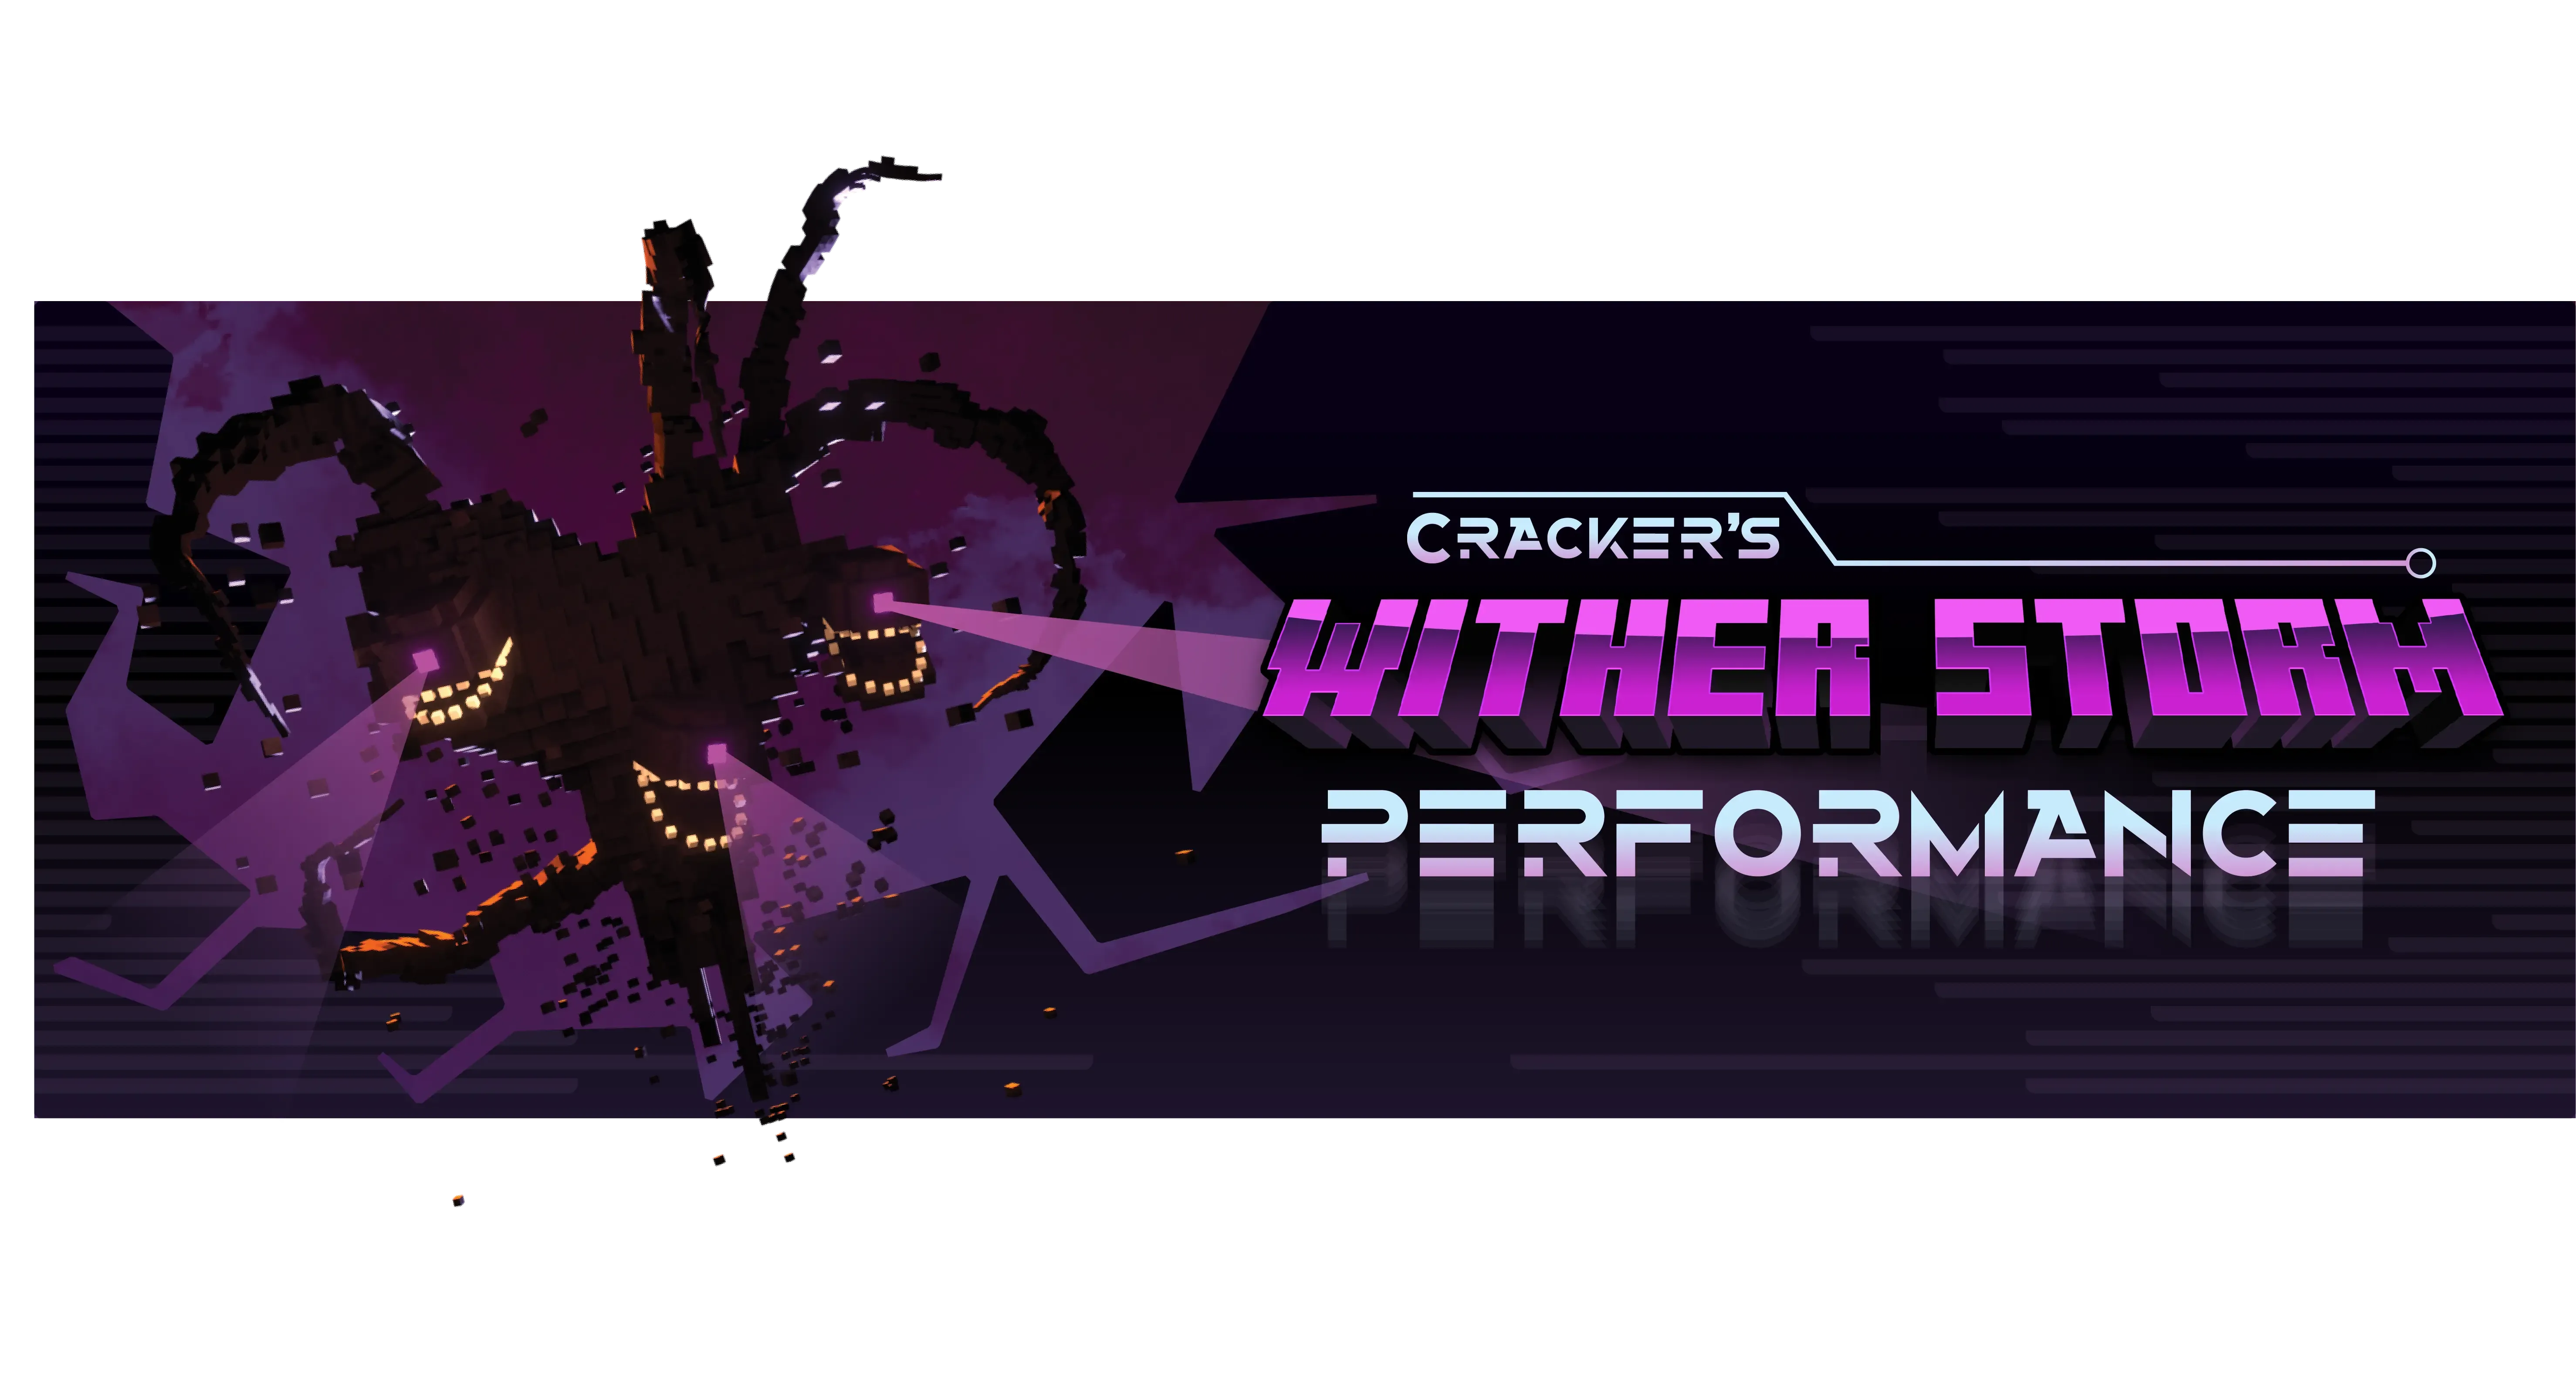 Cracker's Wither Storm Performance Banner